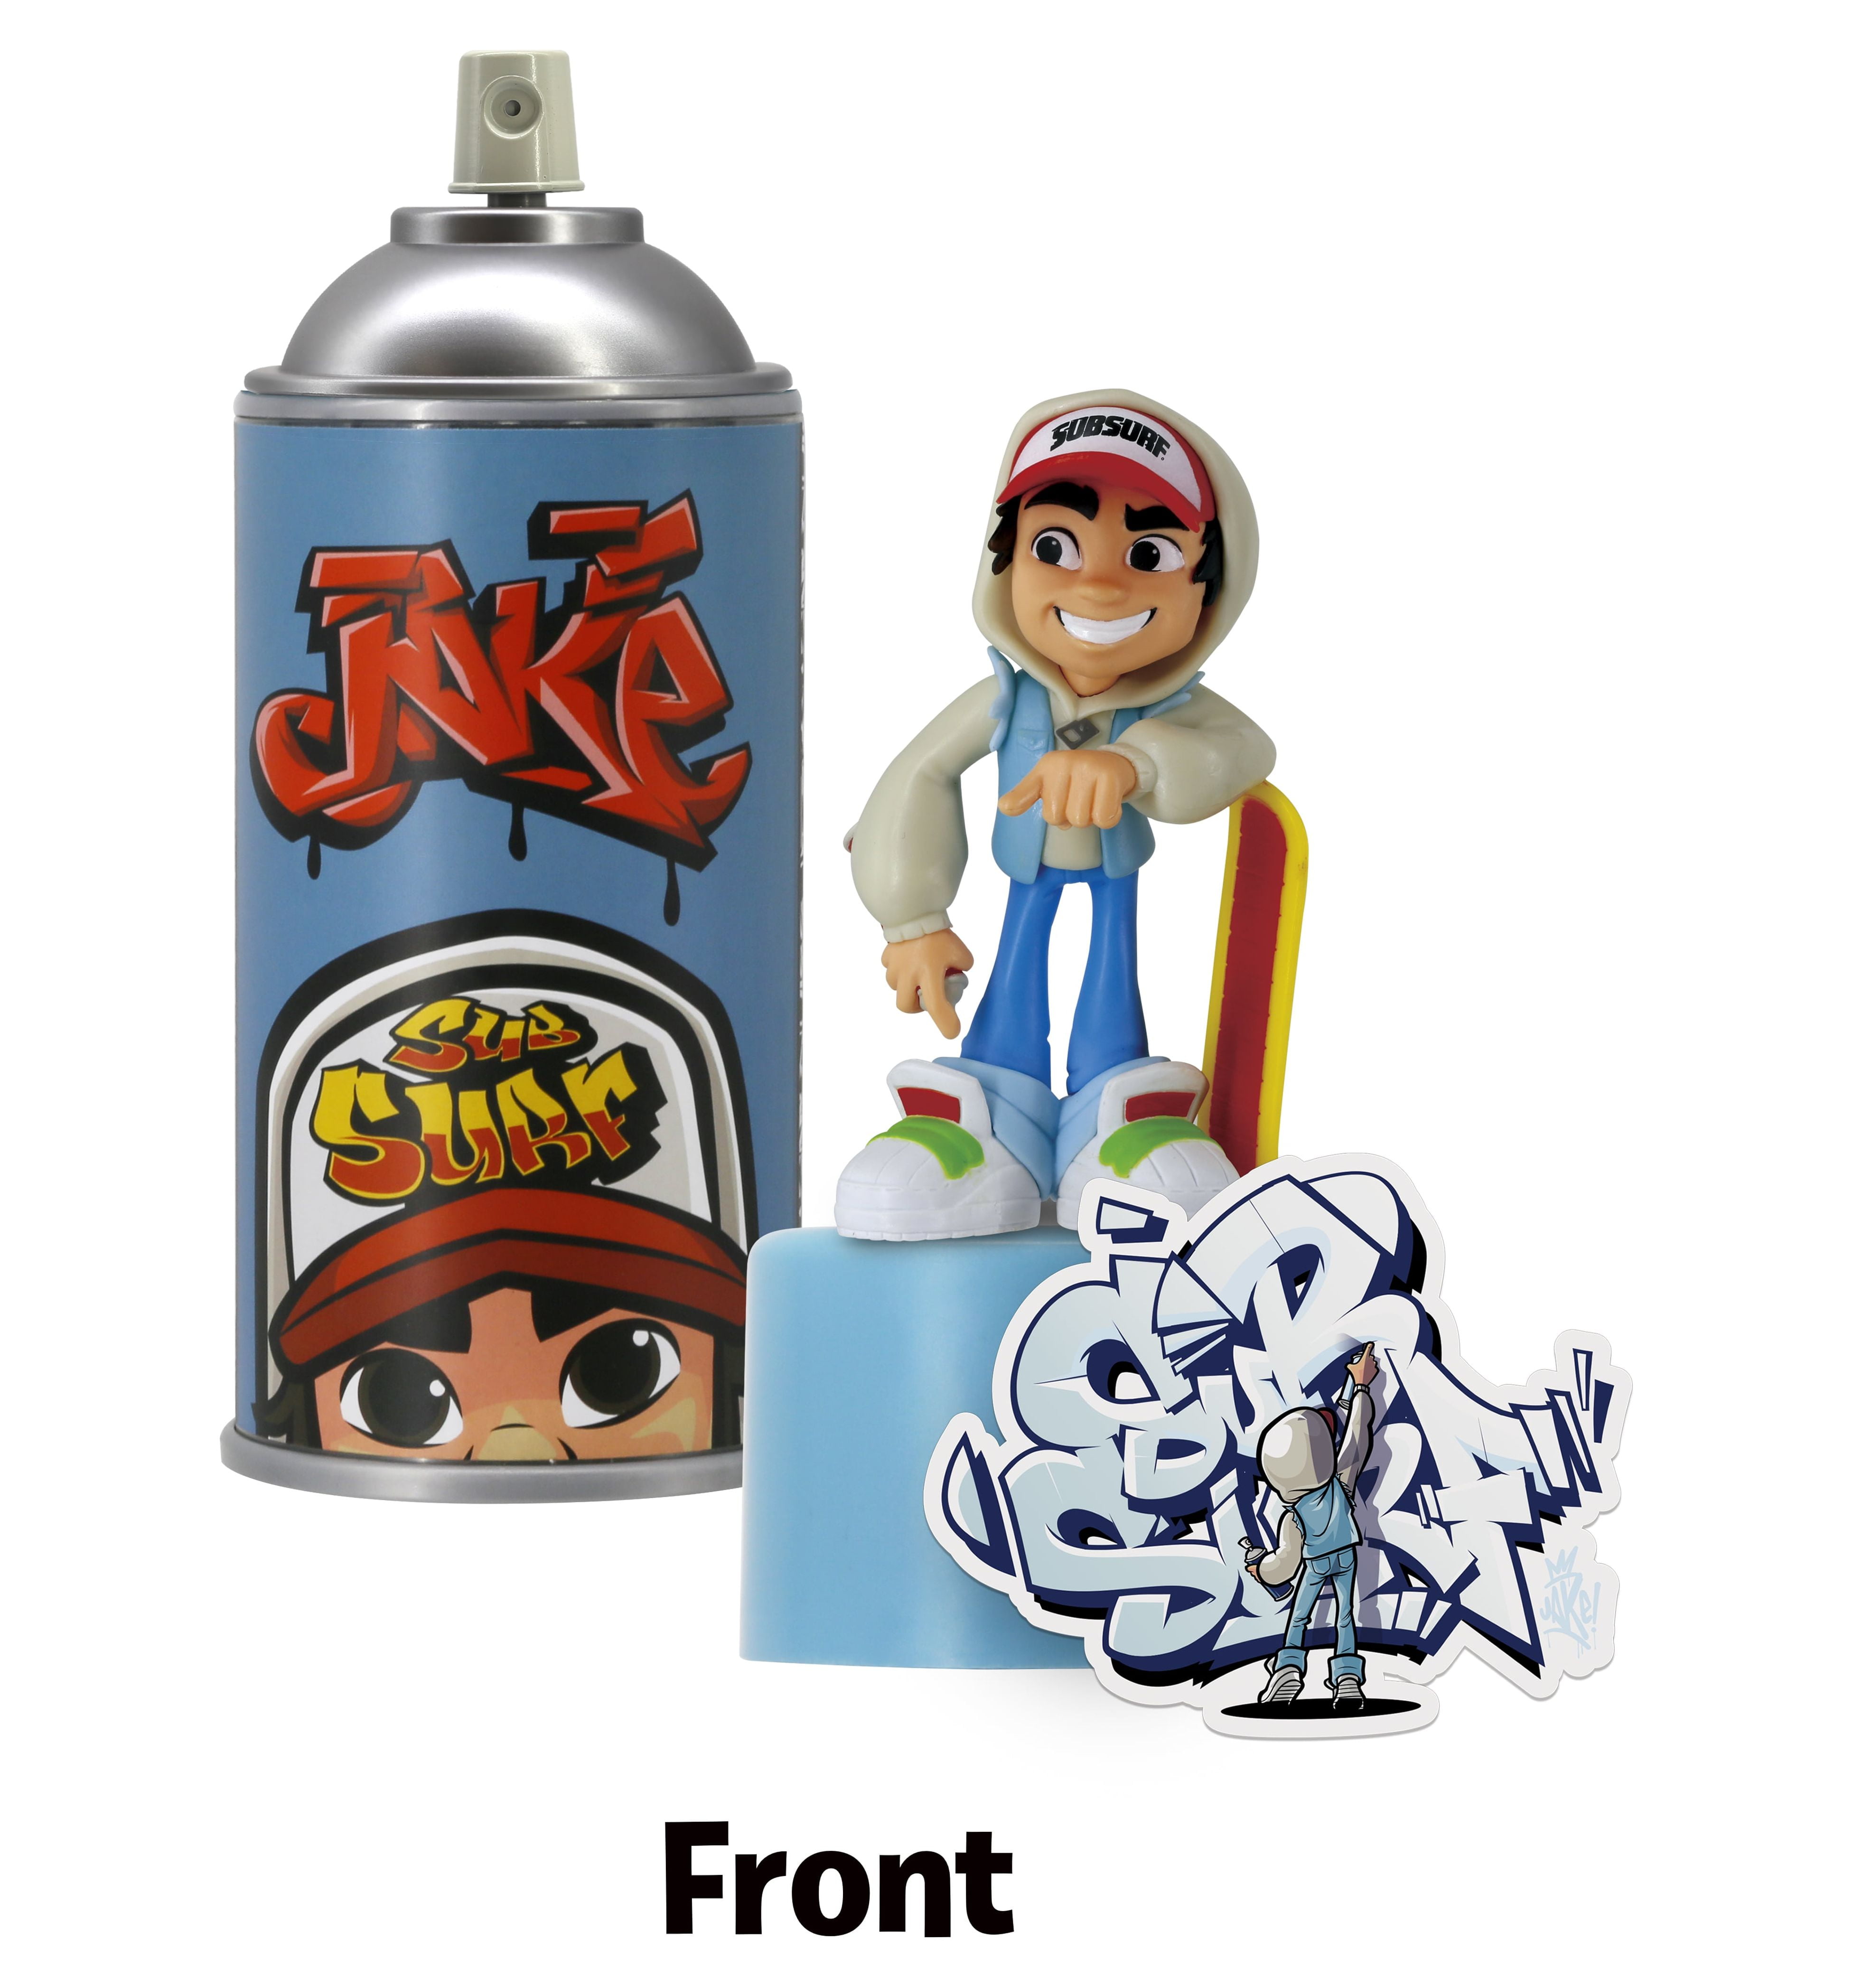 SUBWAY SURFERS SPRAY CREW JAKE AND TRICKY 4” FIGURE INSIDE THE CAN